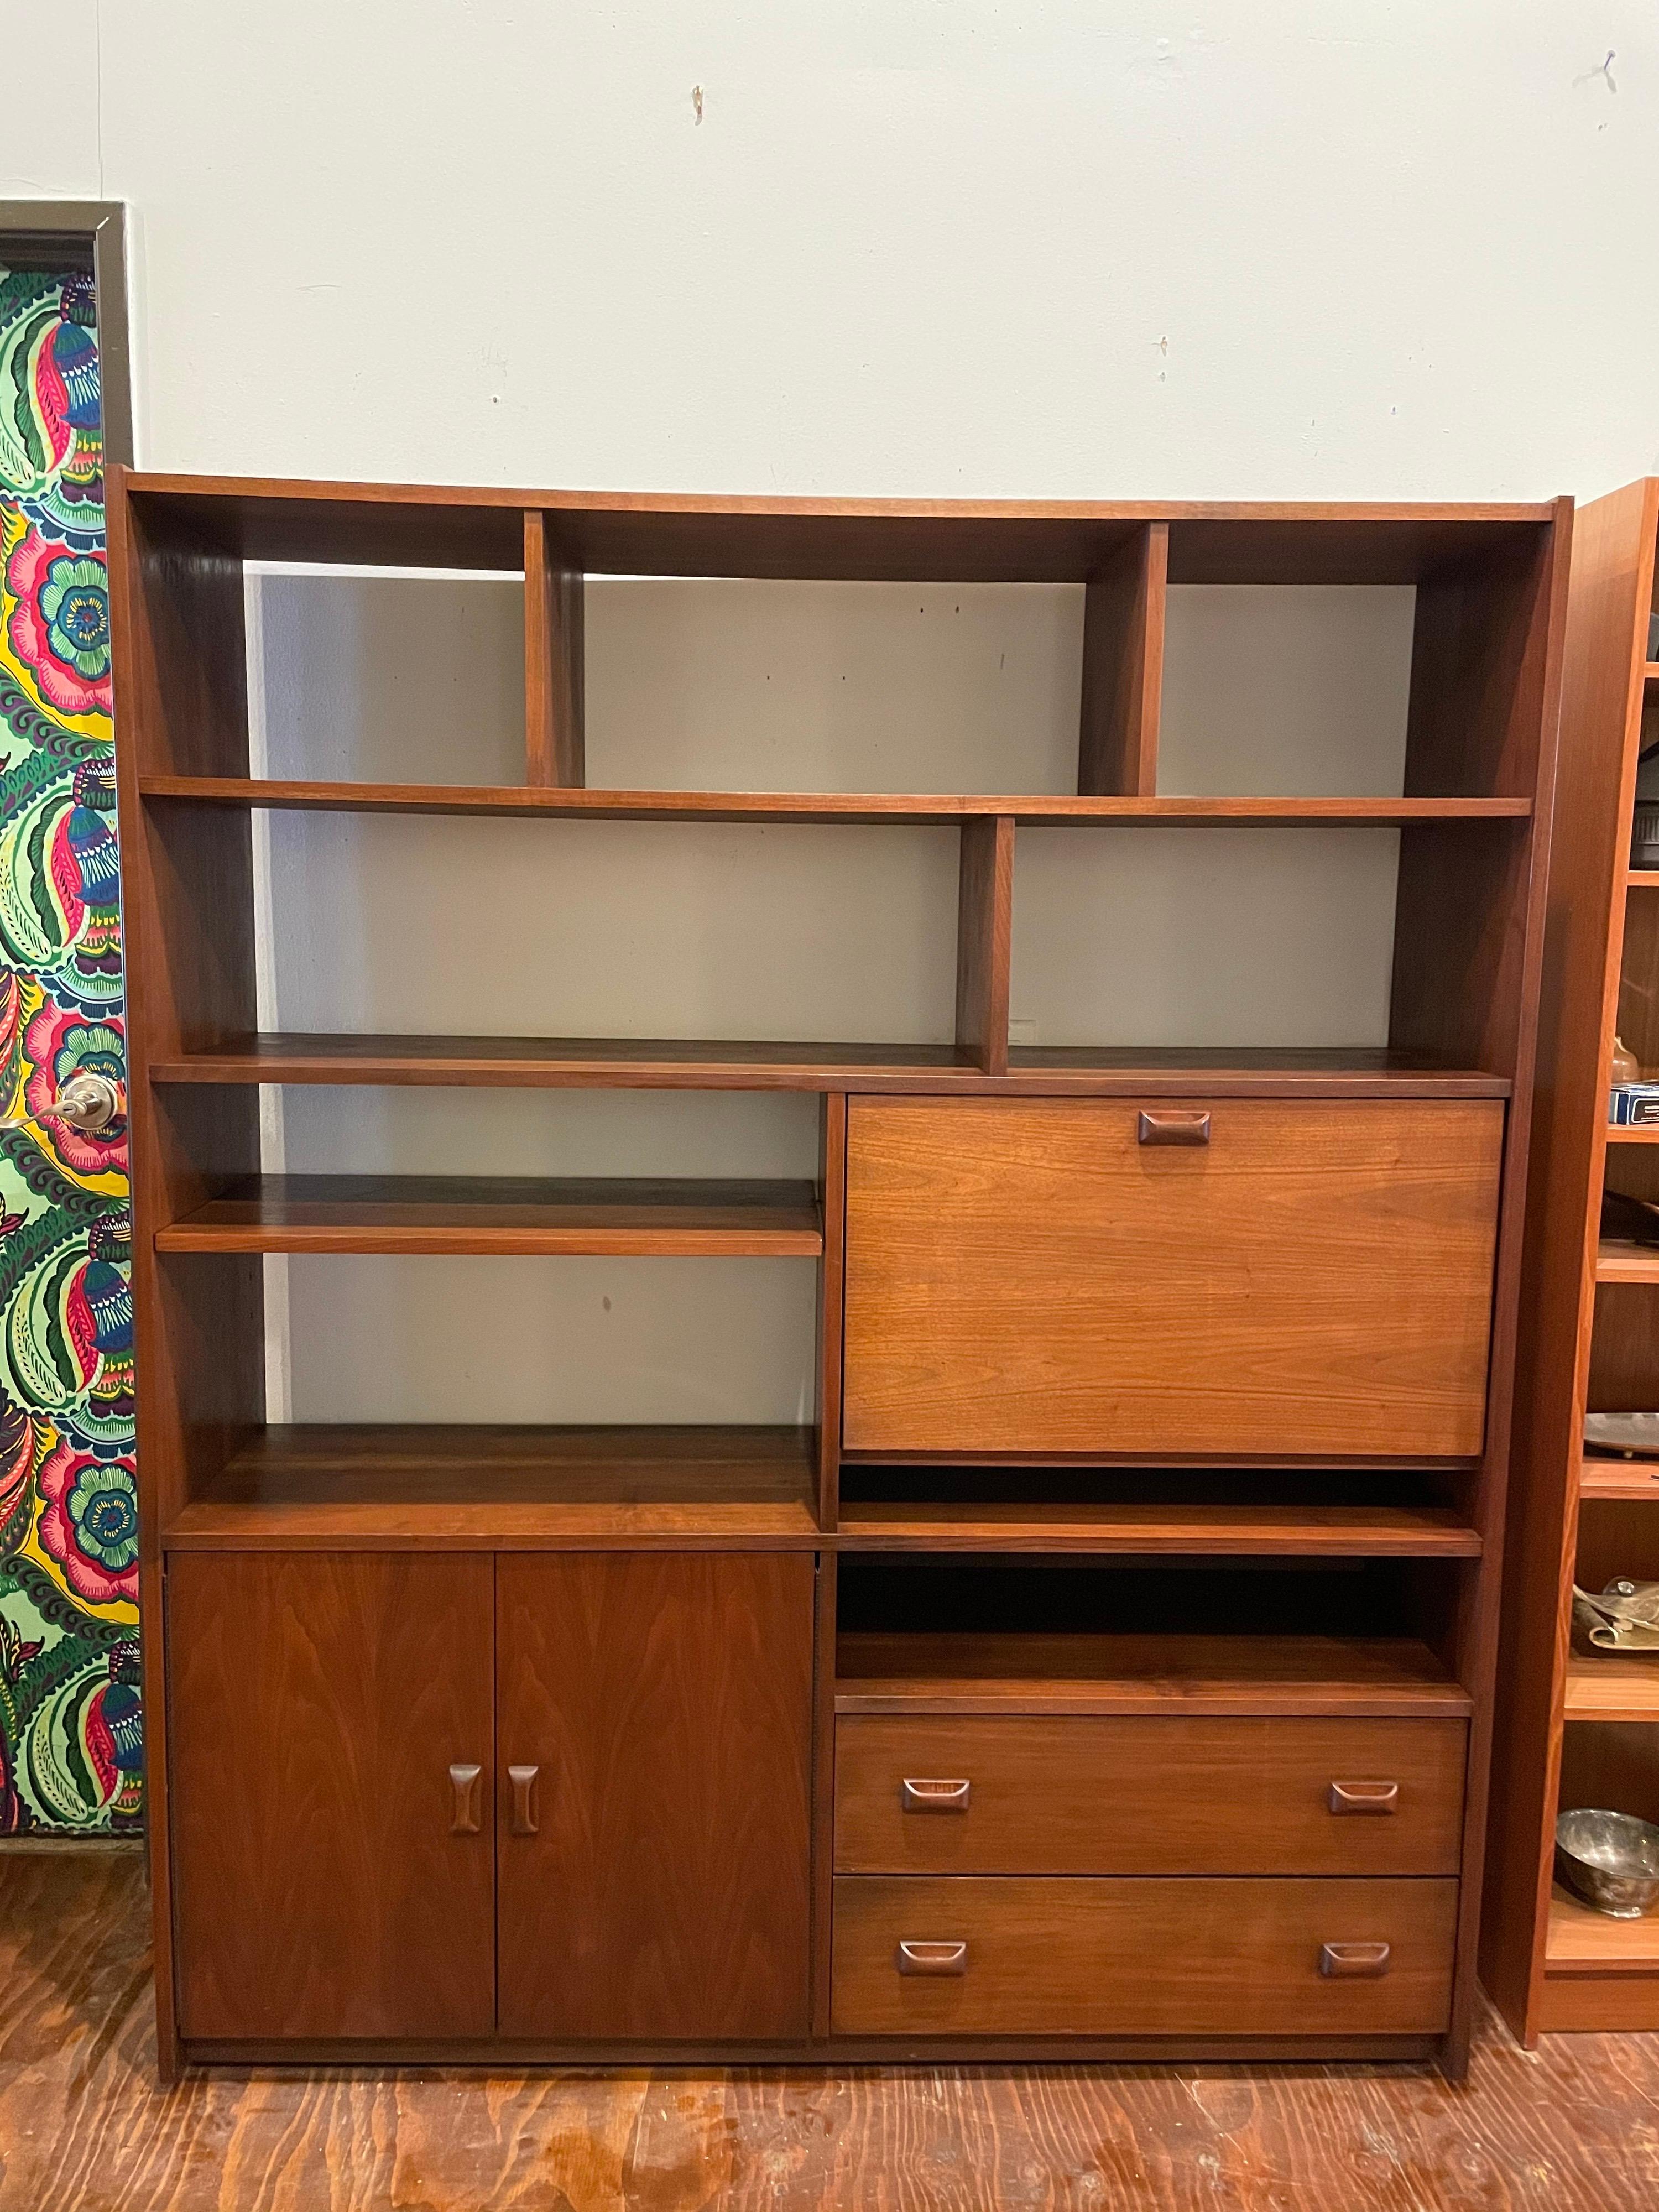 Versatile multiuse walnut bookcase, desk wall unit circa 1960's nice original condition we have cleaned and oiled this piece with one removable shelf drawers desk bar etc.